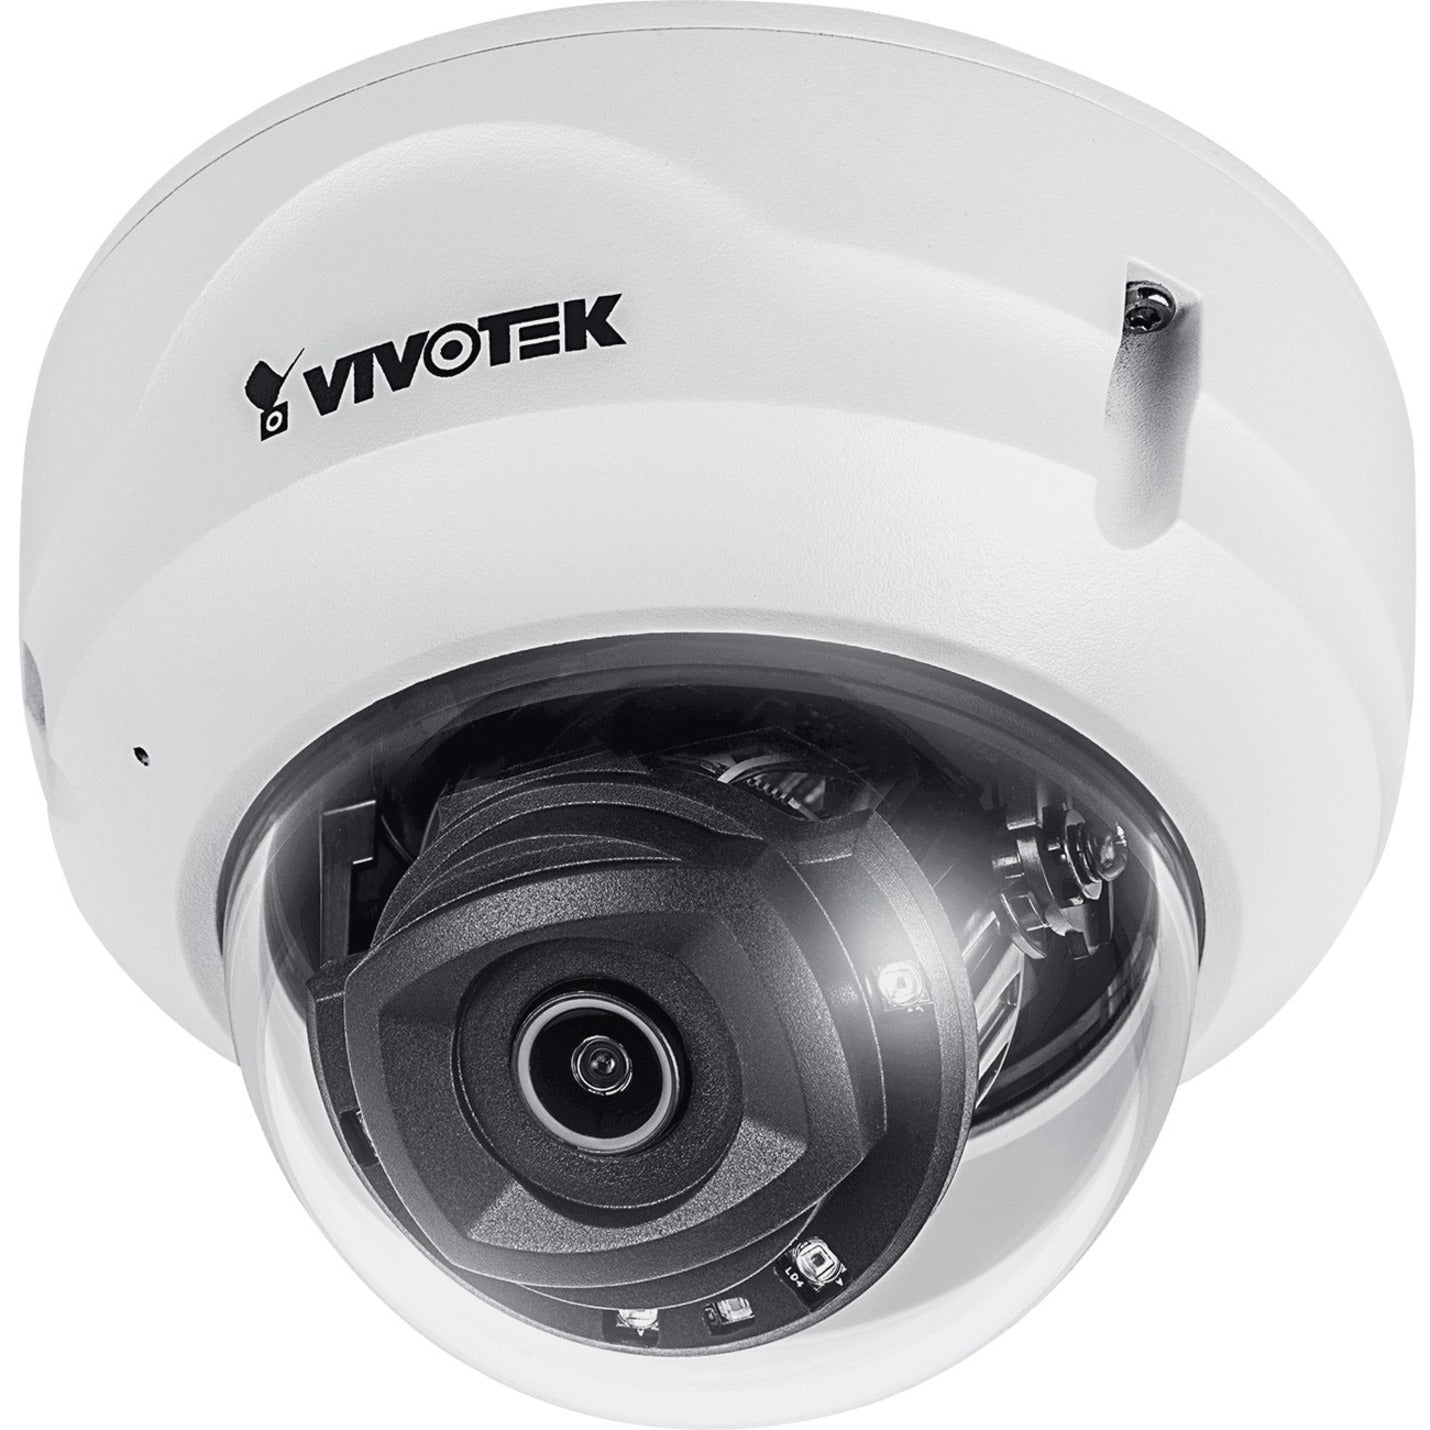 Vivotek FD9389-EHV-V2 Network Camera, 5MP 30M IR H.265 Outdoor Fixed Focal WDR Dome, IoT Security